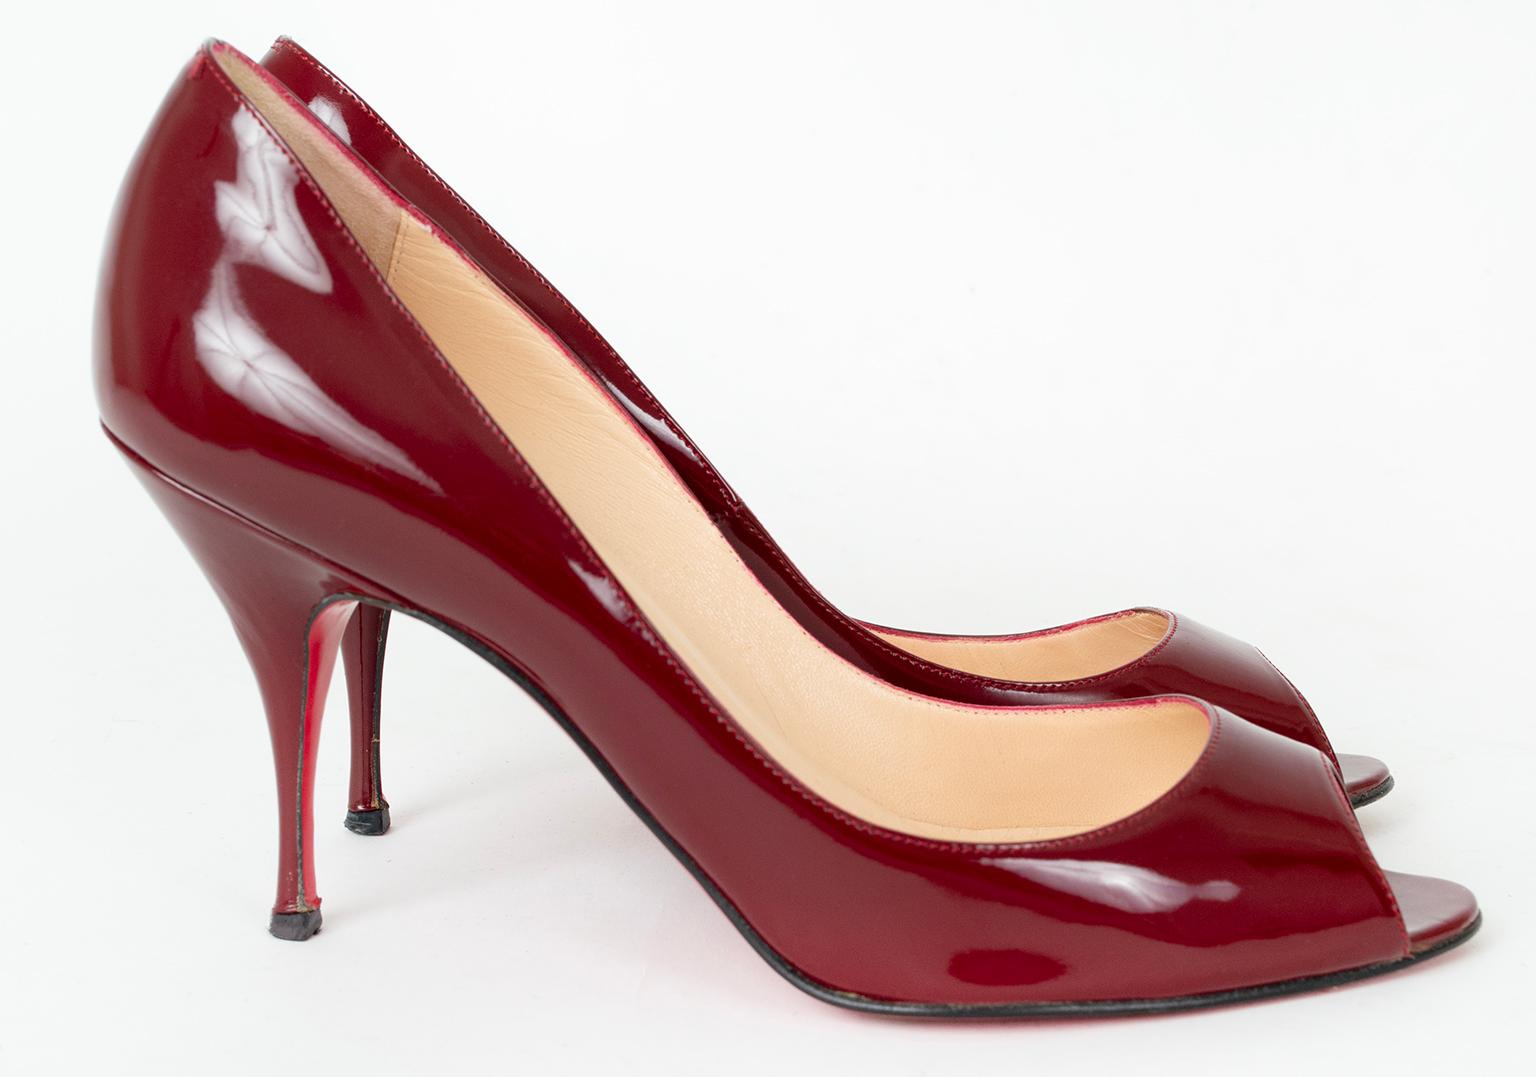 Christian Louboutin Burgundy Patent Clare Peep Toe Stiletto, 80 mm - 39, 2002 In Good Condition For Sale In Tucson, AZ